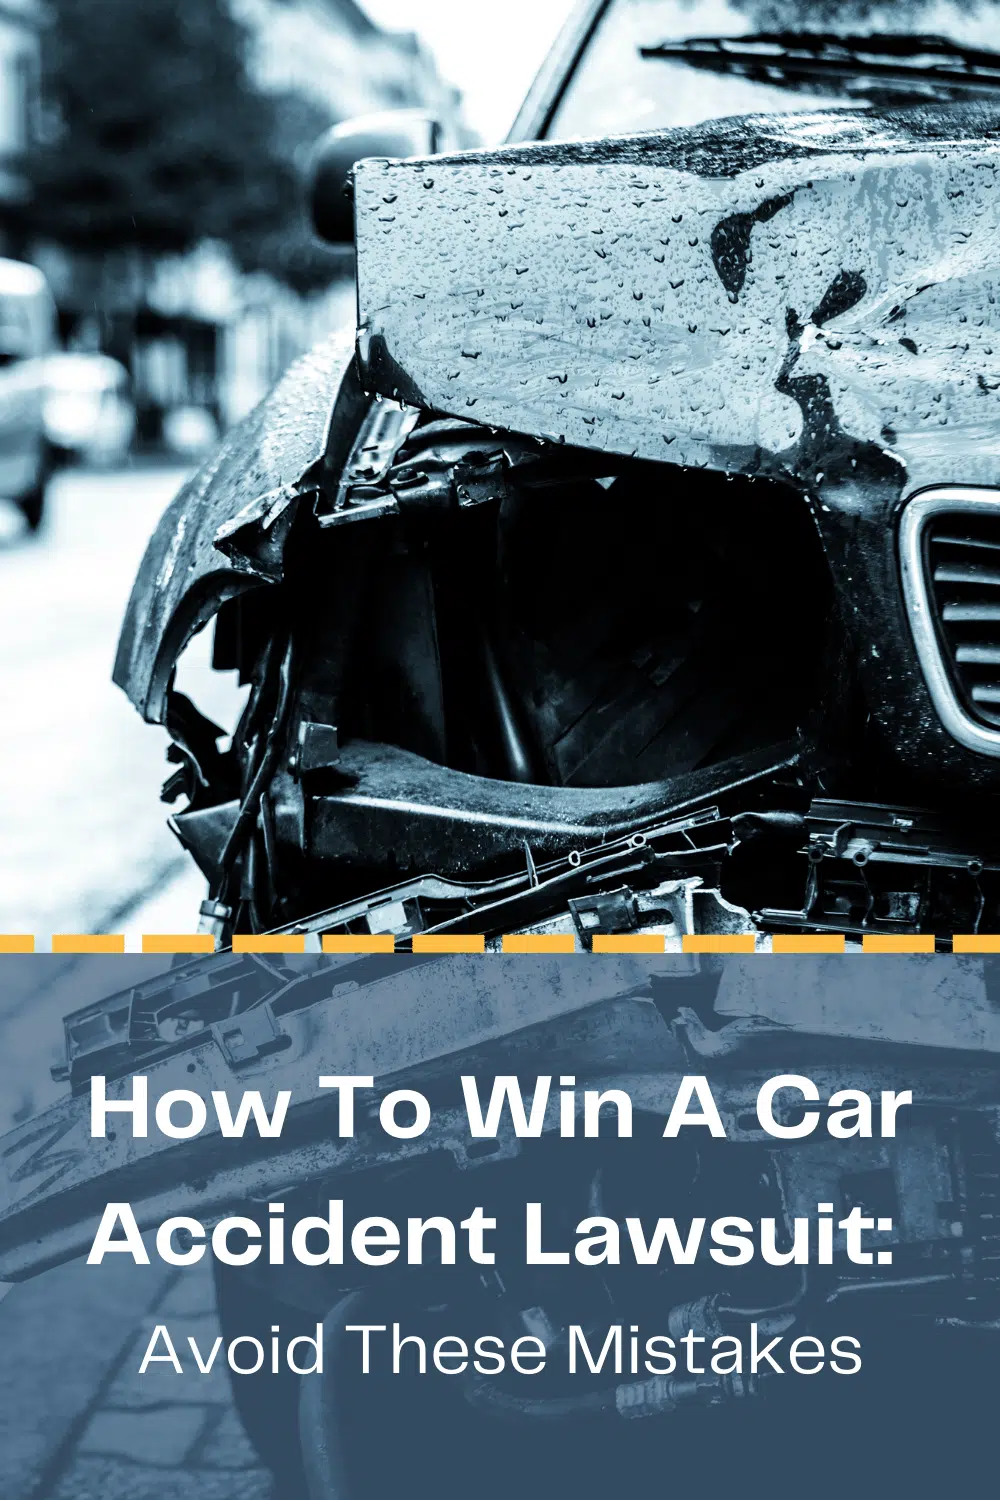 How To Win A Car Accident Lawsuit: Avoid These Mistakes